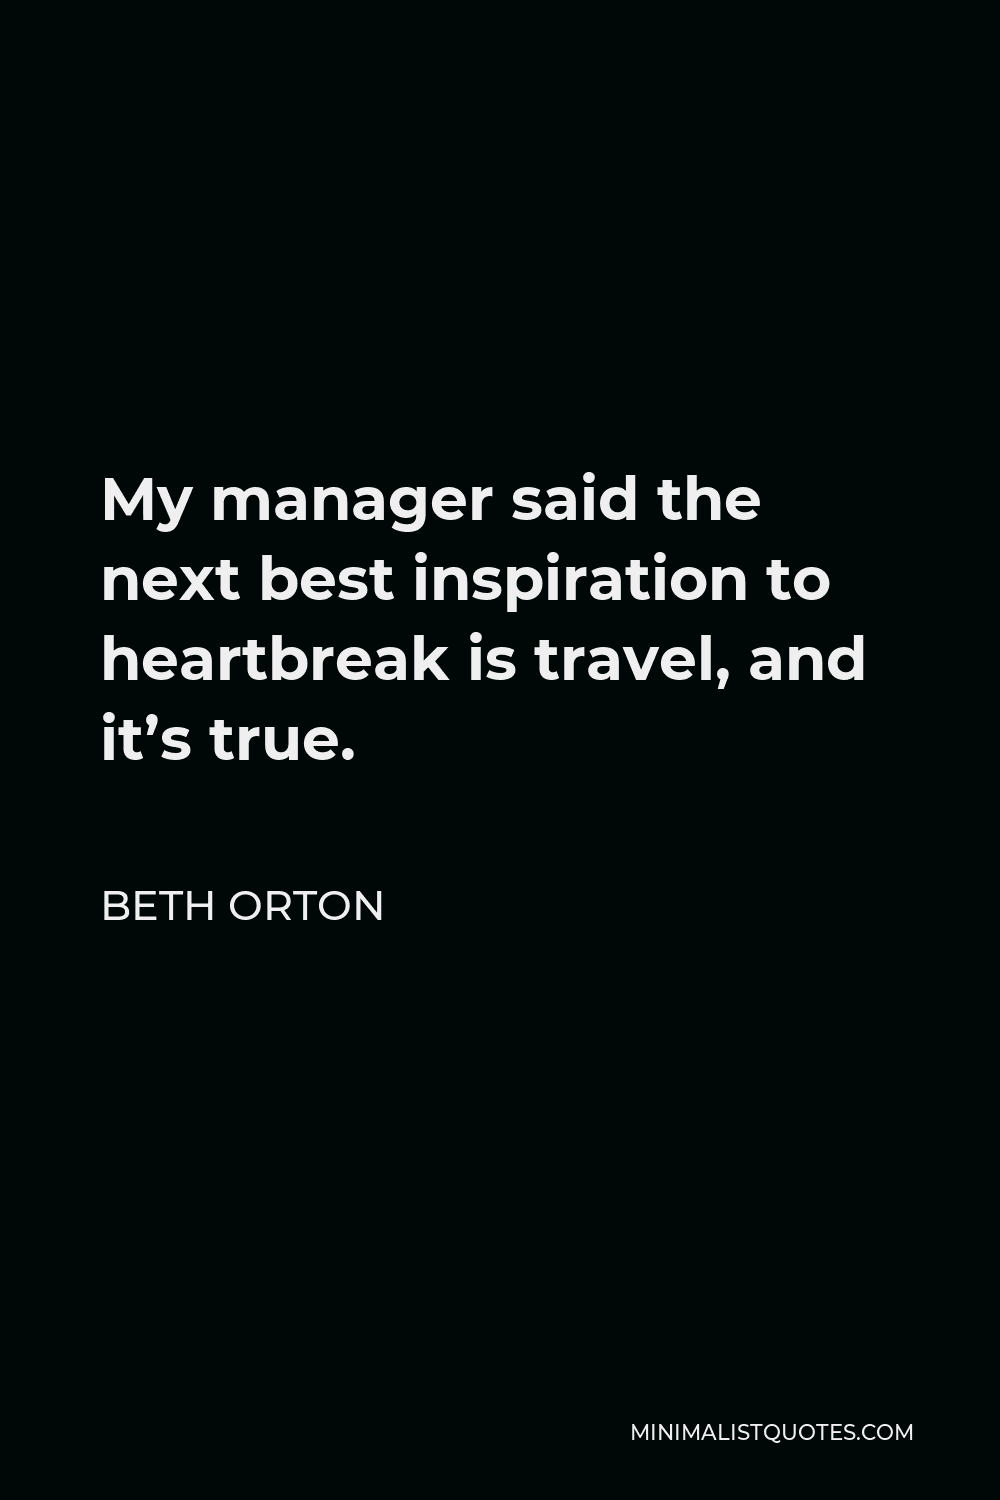 Beth Orton Quote - My manager said the next best inspiration to heartbreak is travel, and it’s true.